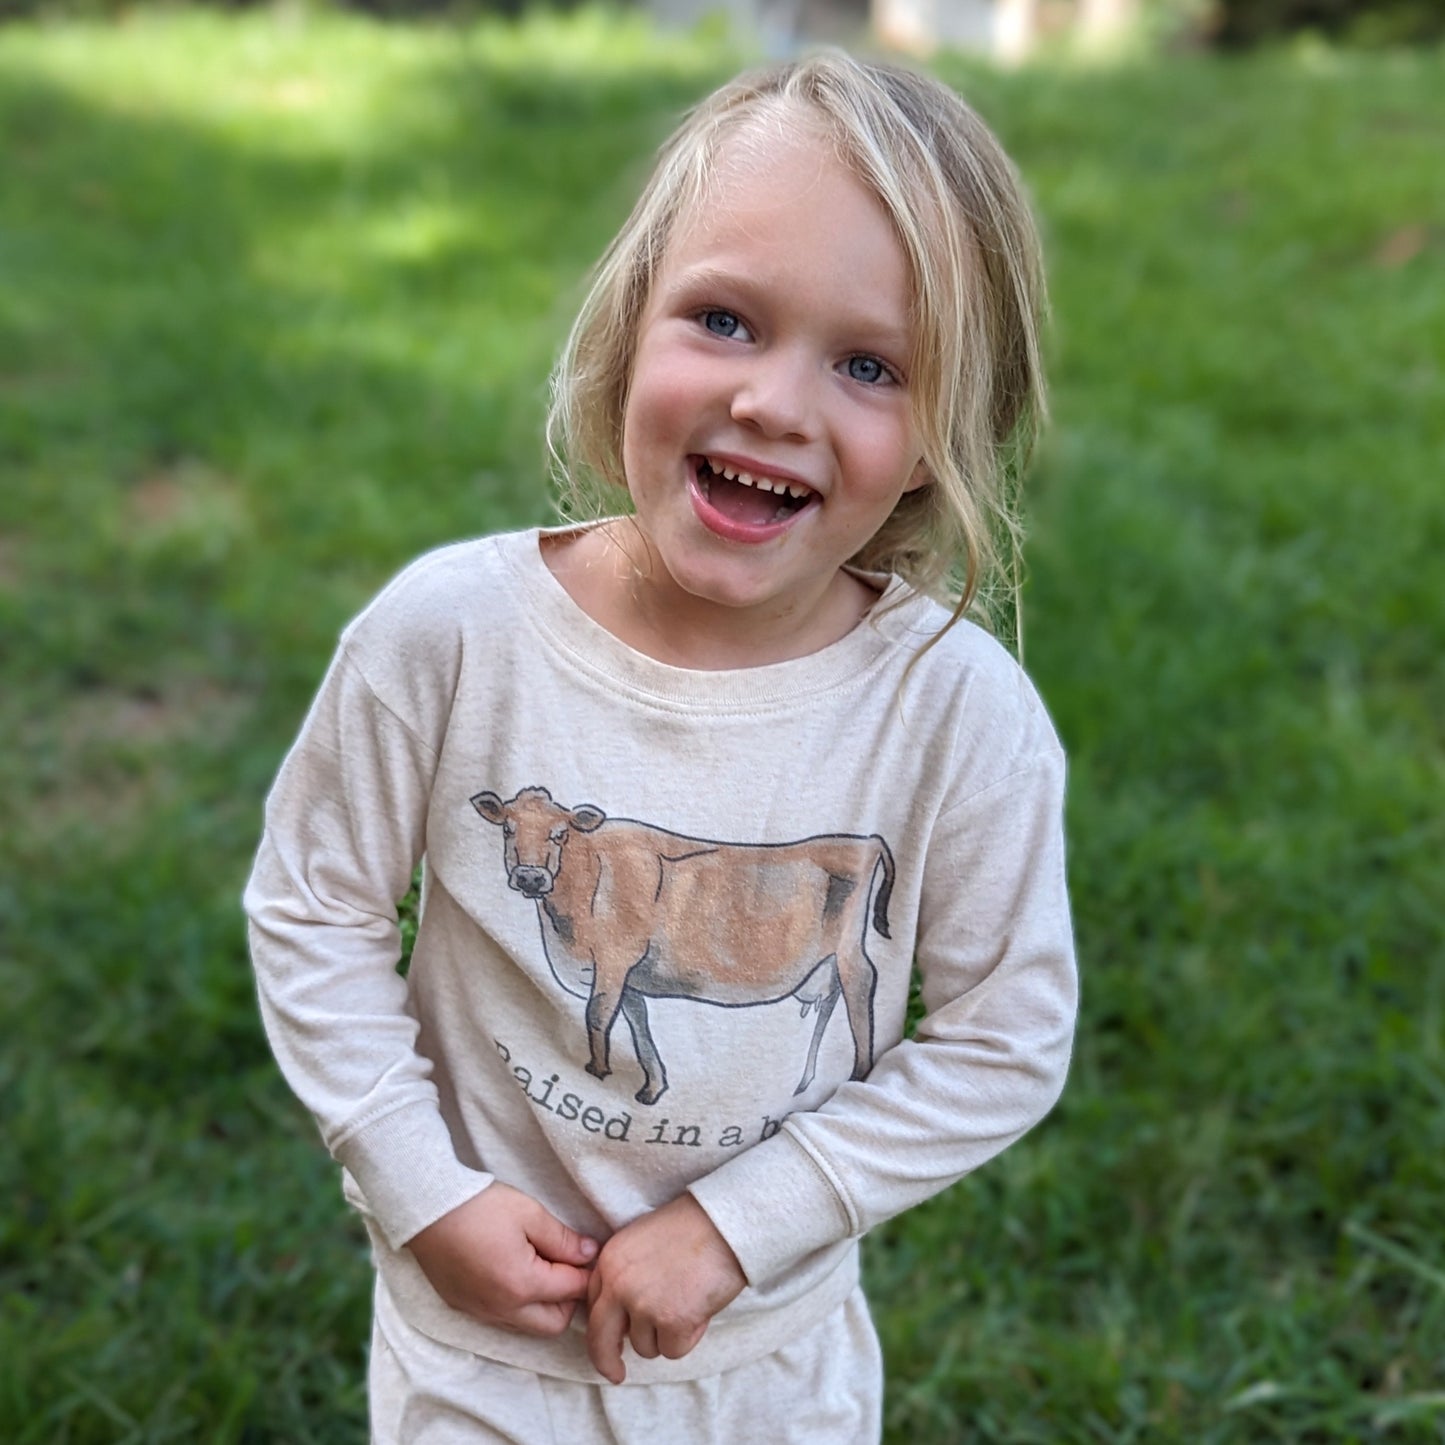 COW "Raised in a barn" Toddler Long Sleeve Shirt